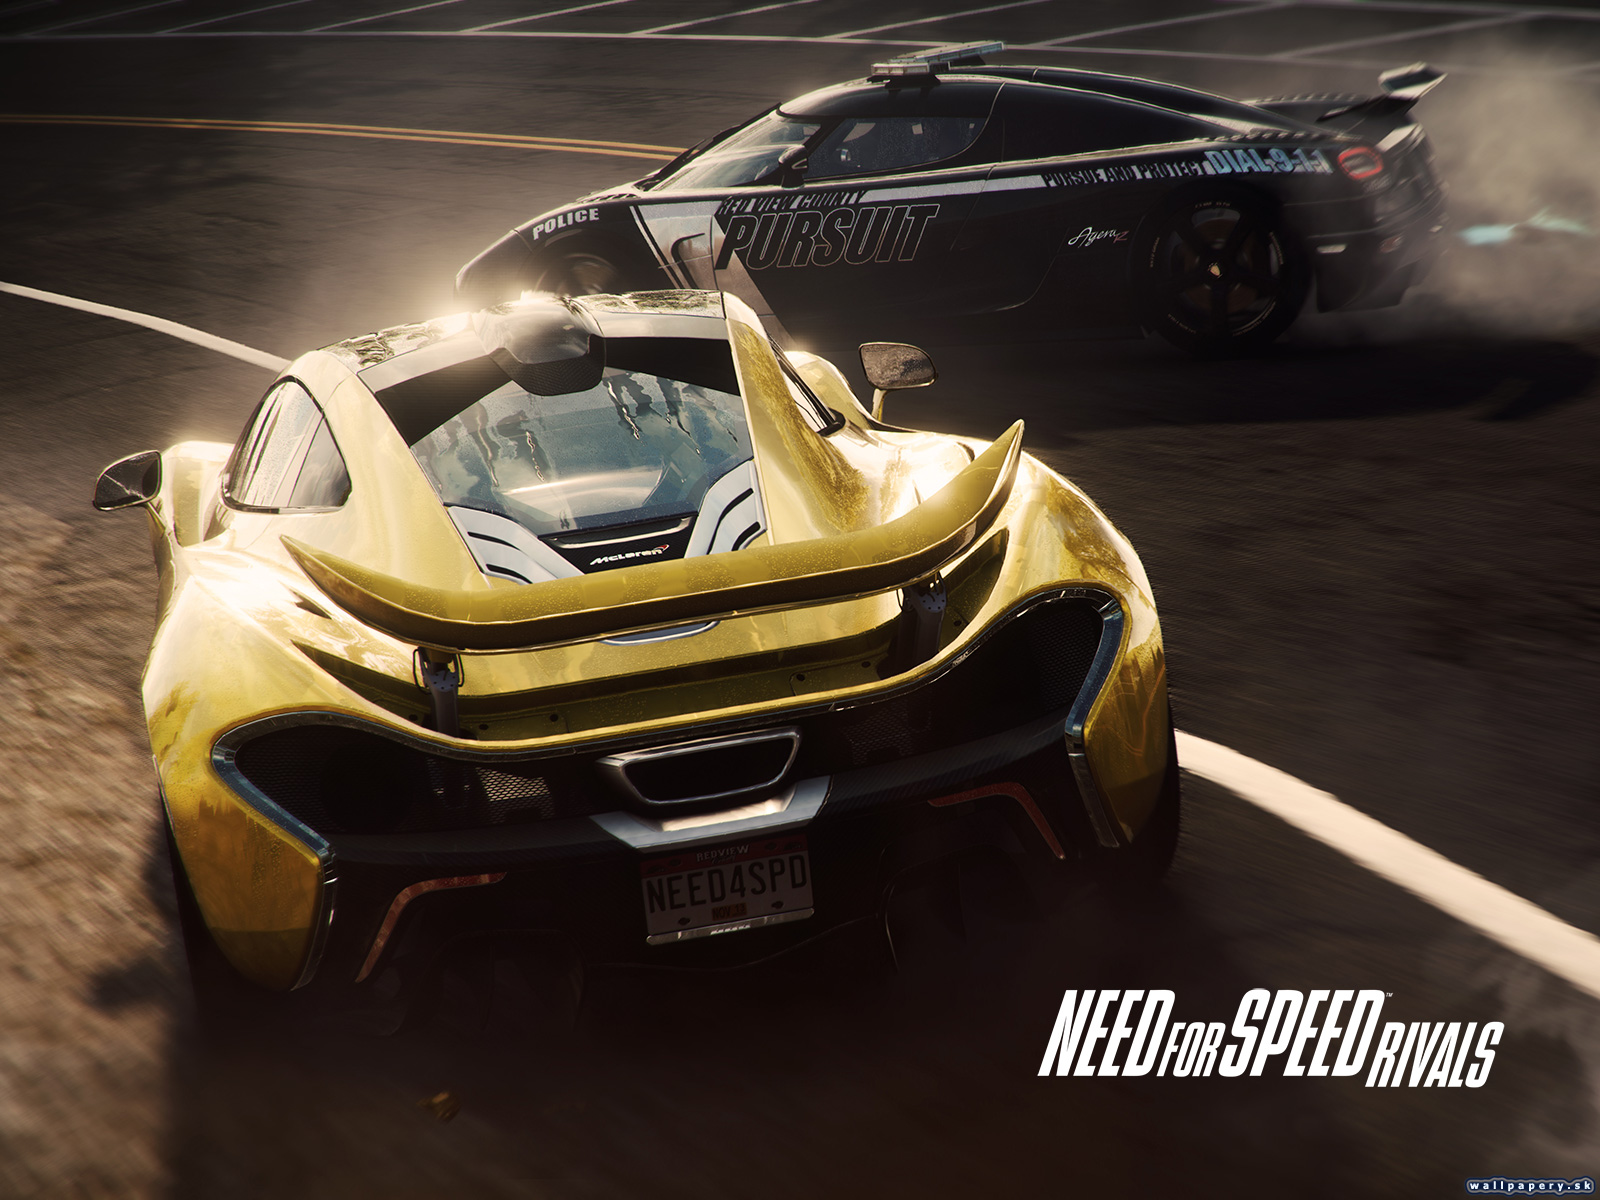 Need for Speed: Rivals - wallpaper 5